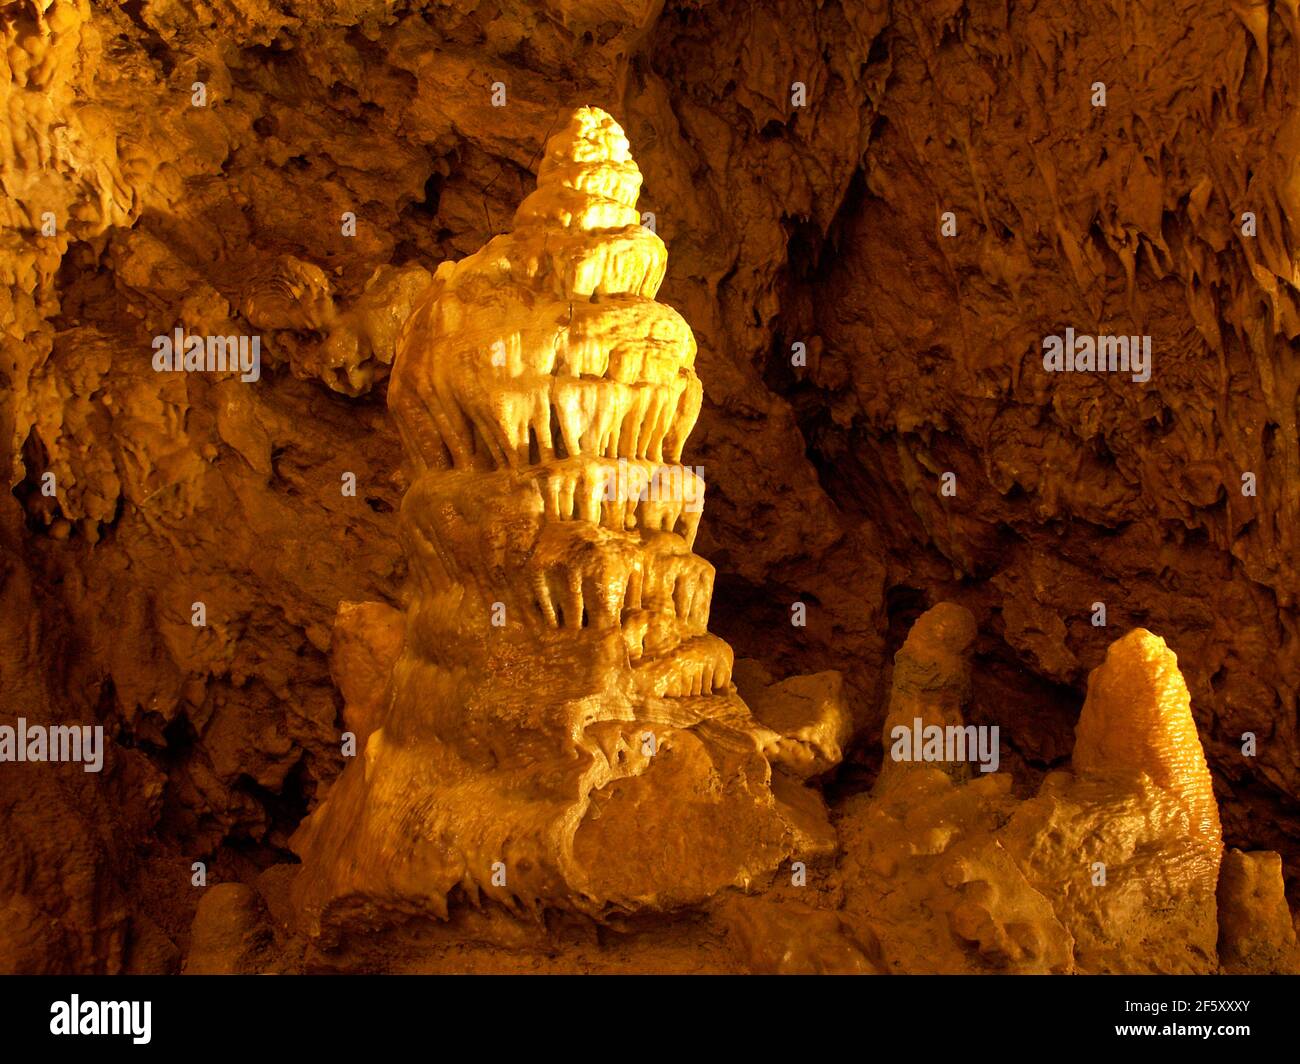 Stalagmite in the Charlotten Cave (Charlottenhöhle) near Hürben (part of Gingen) on the Swabian Alps, Baden-Württemberg, Germany Stock Photo